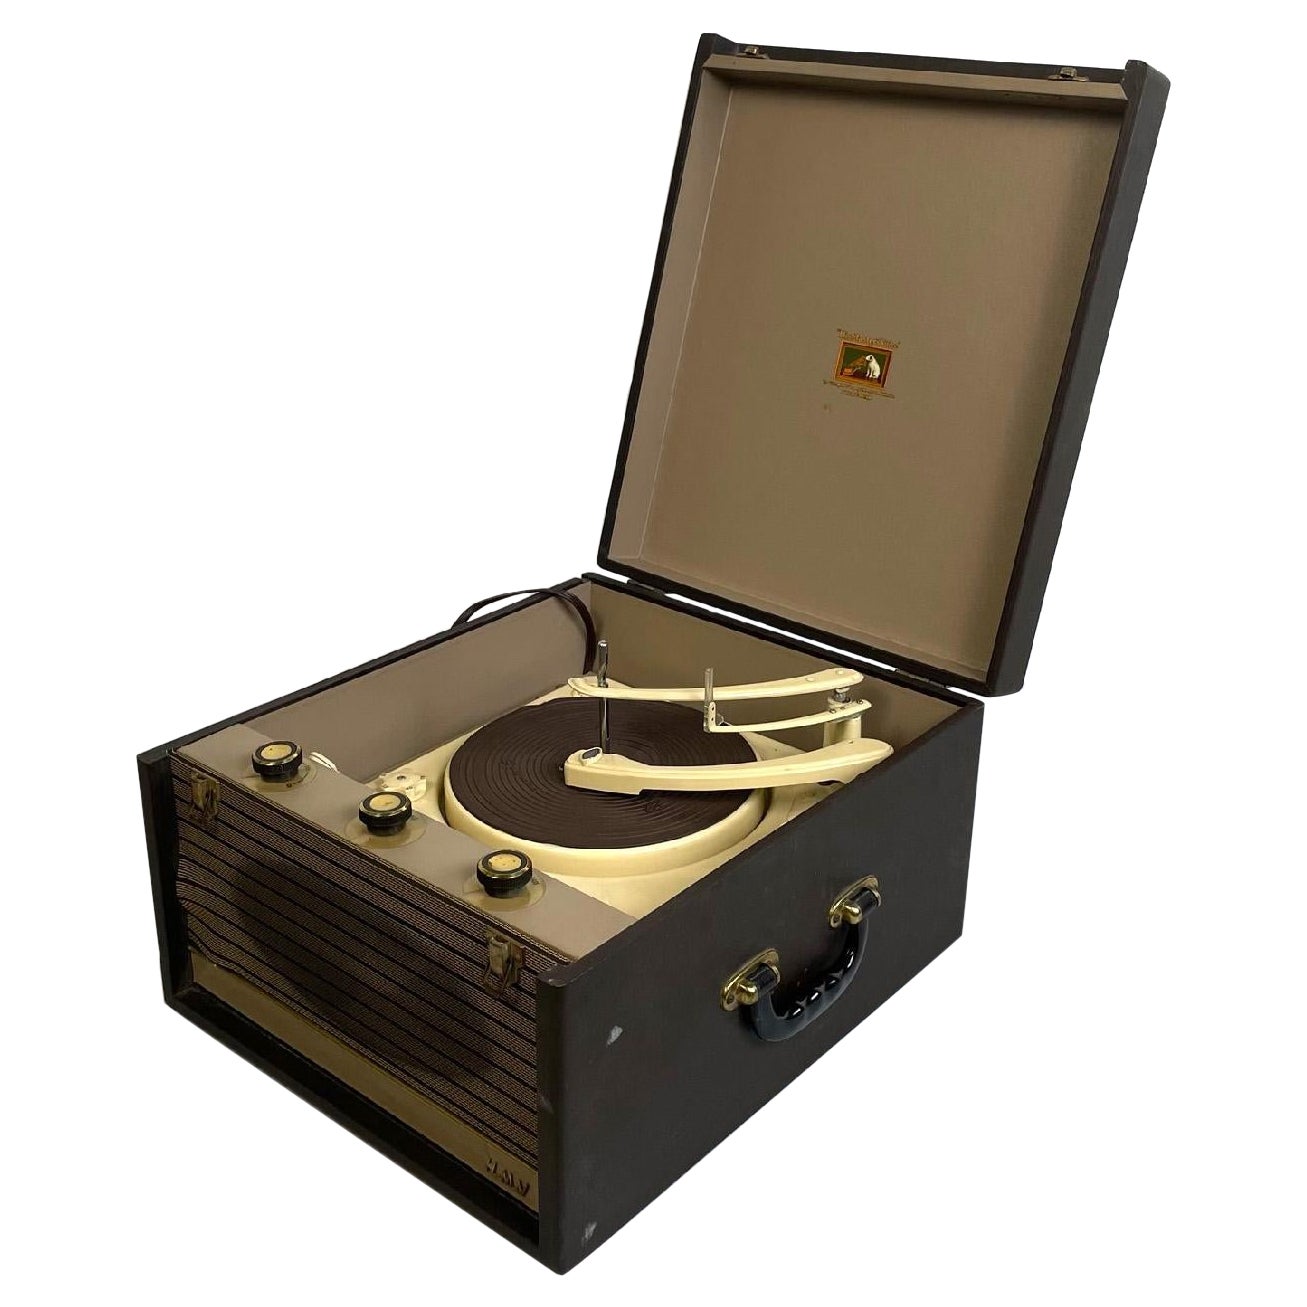 What were old-time record players called?